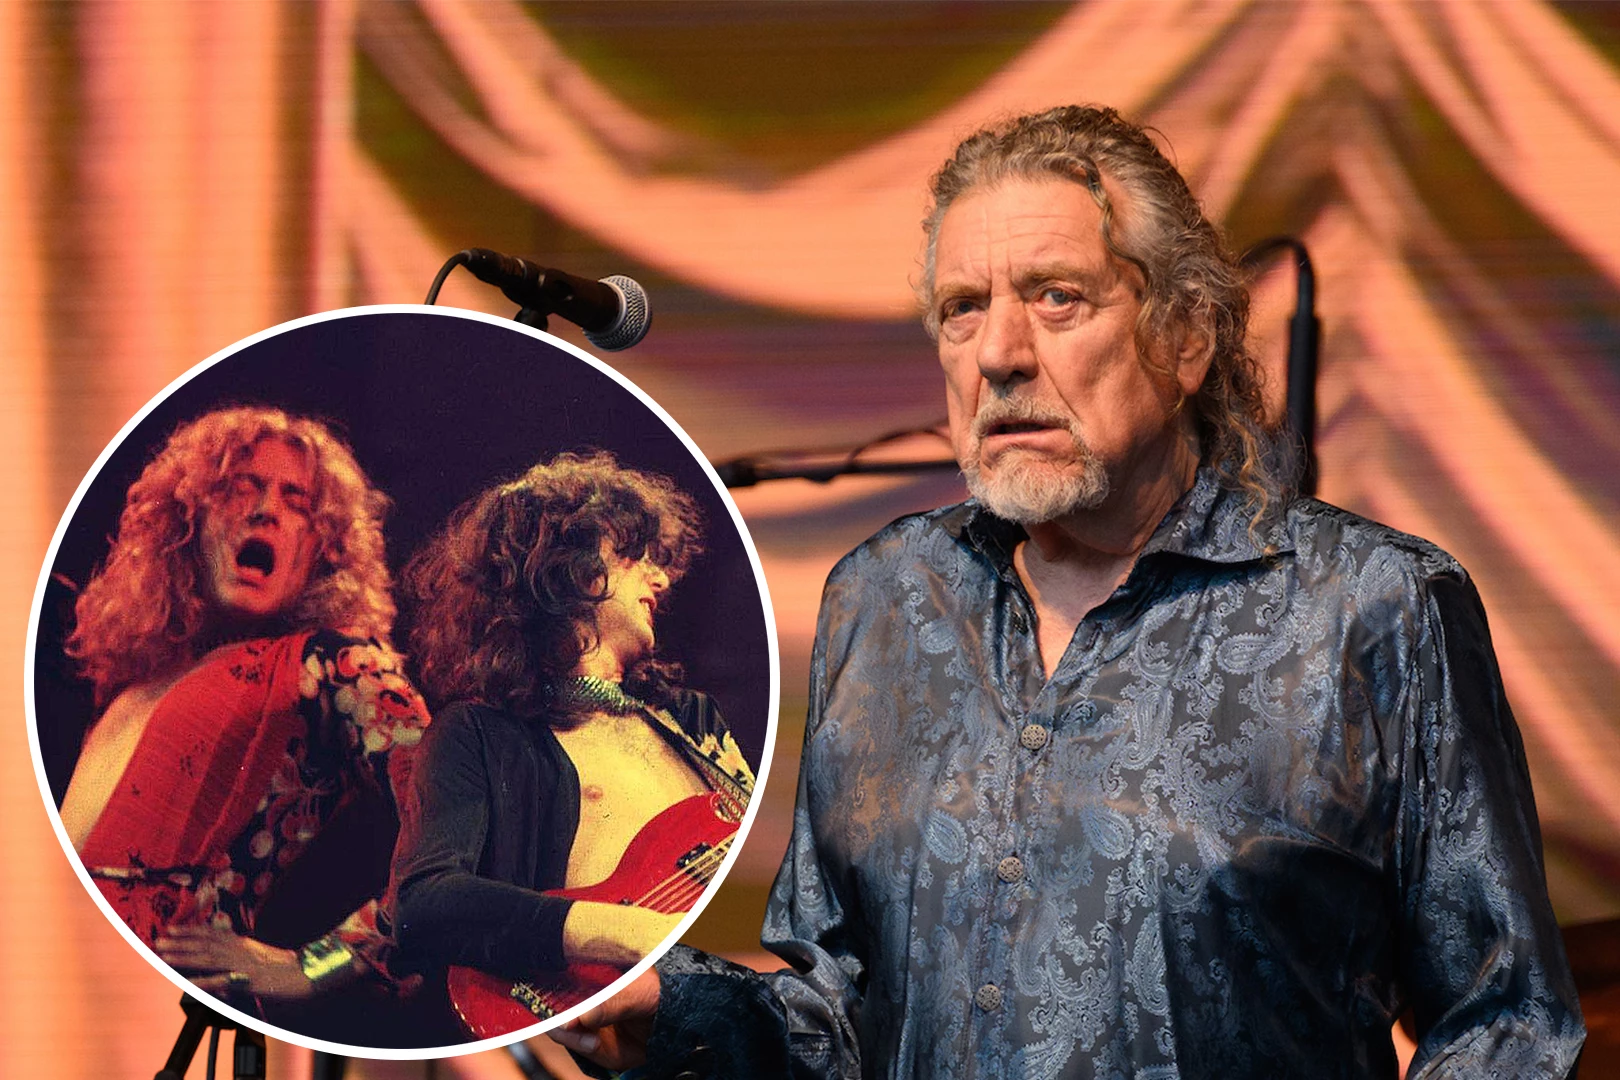 Plant - Zeppelin Reunion Won't 'Satisfy My Need to Be Stimulated'